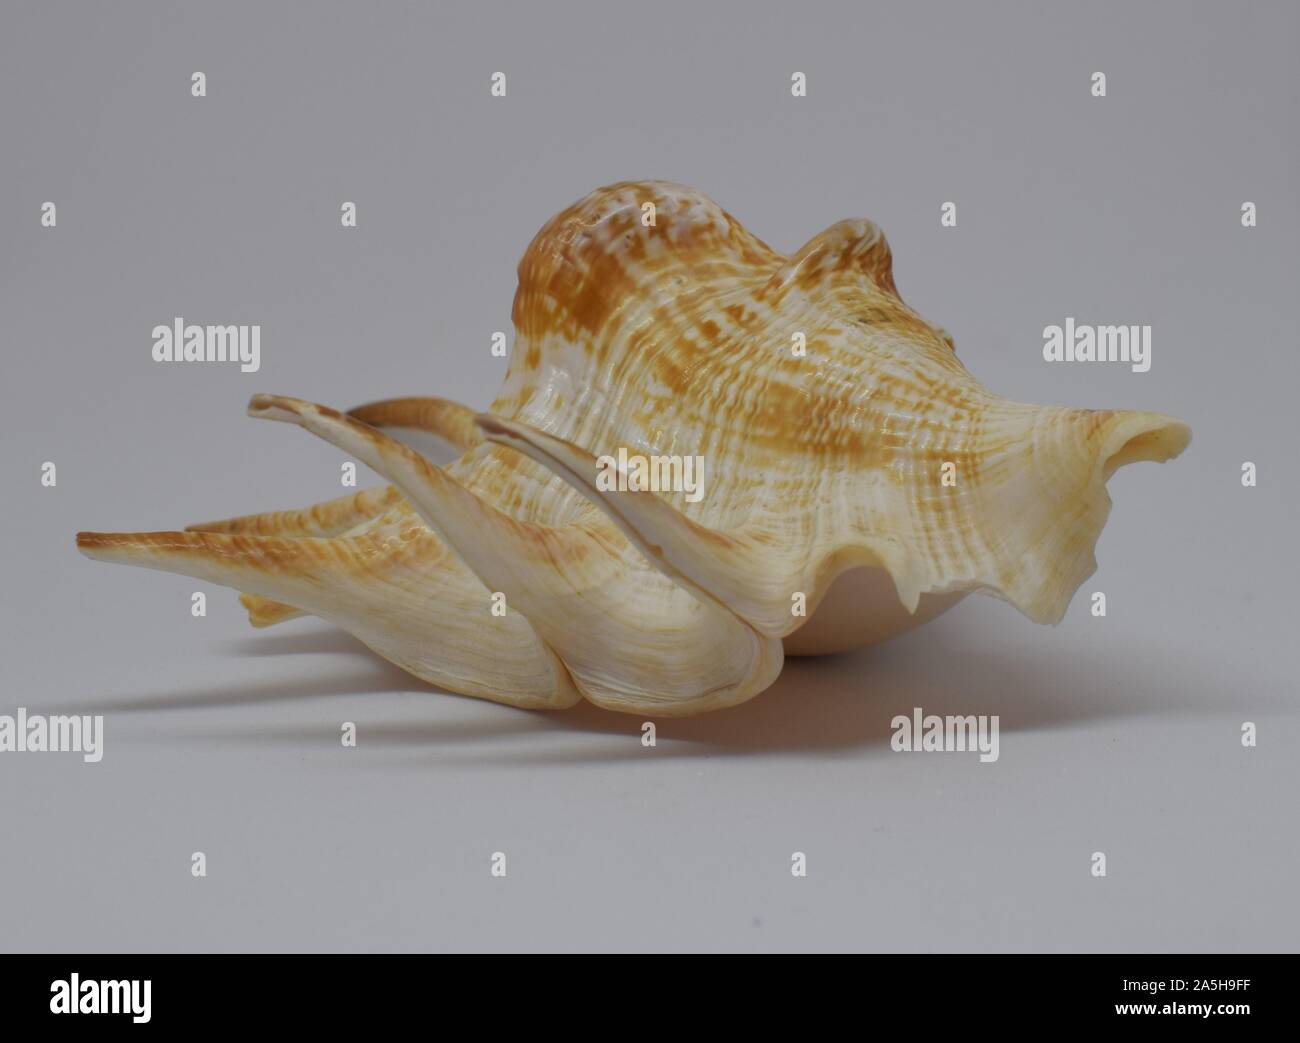 Sea conch full frontal view of marine fossils on white background. Stock Photo